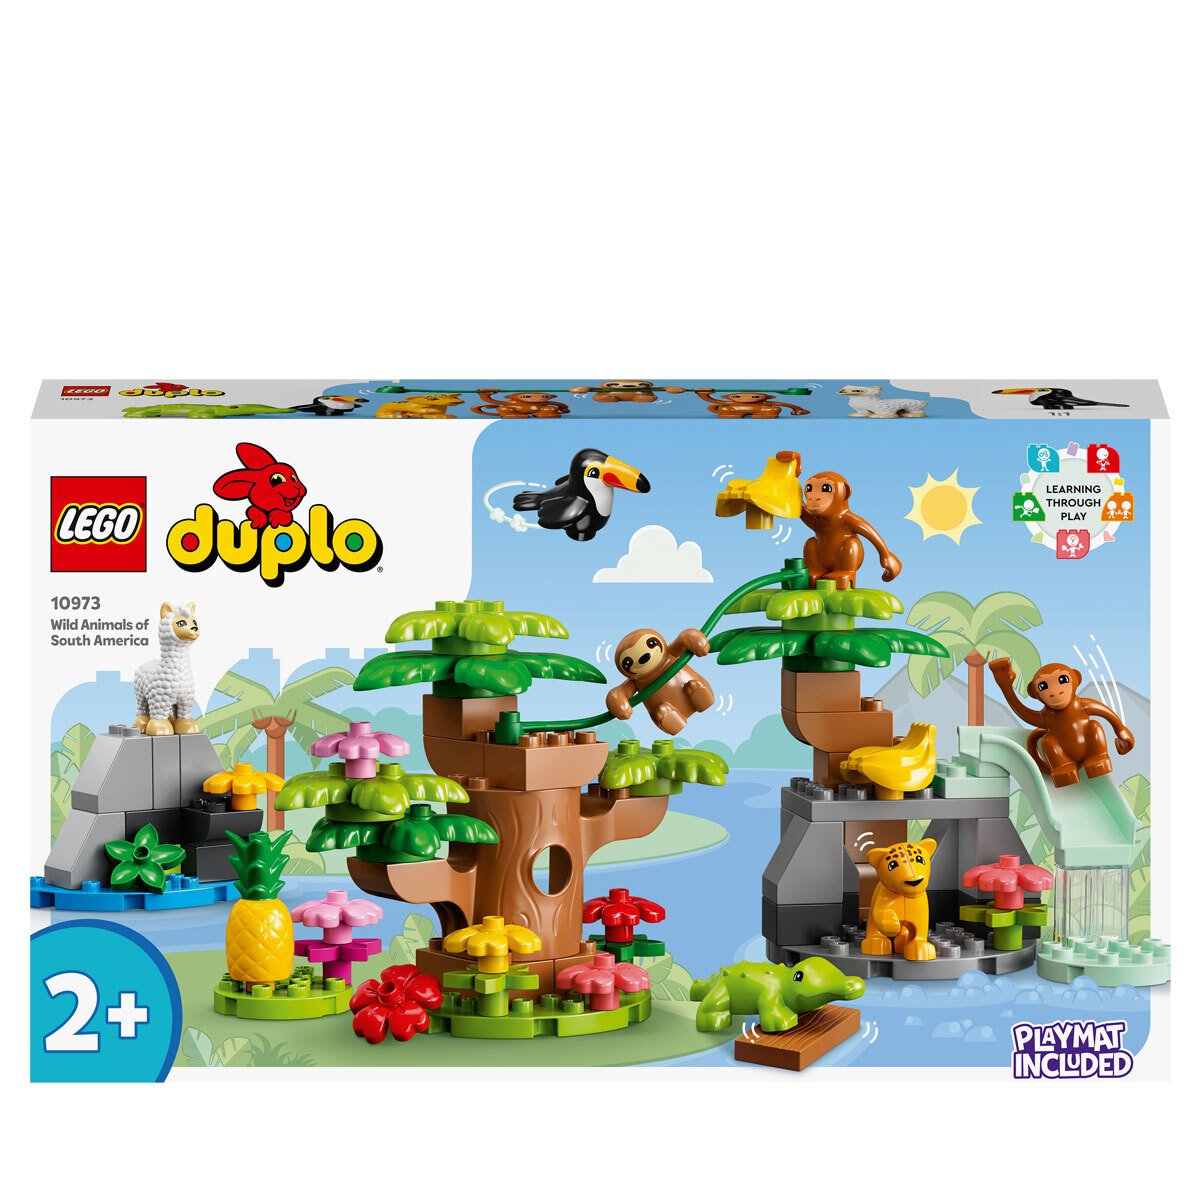 LEGO DUPLO Wild Animals of South America 10973 | Early Learning Centre